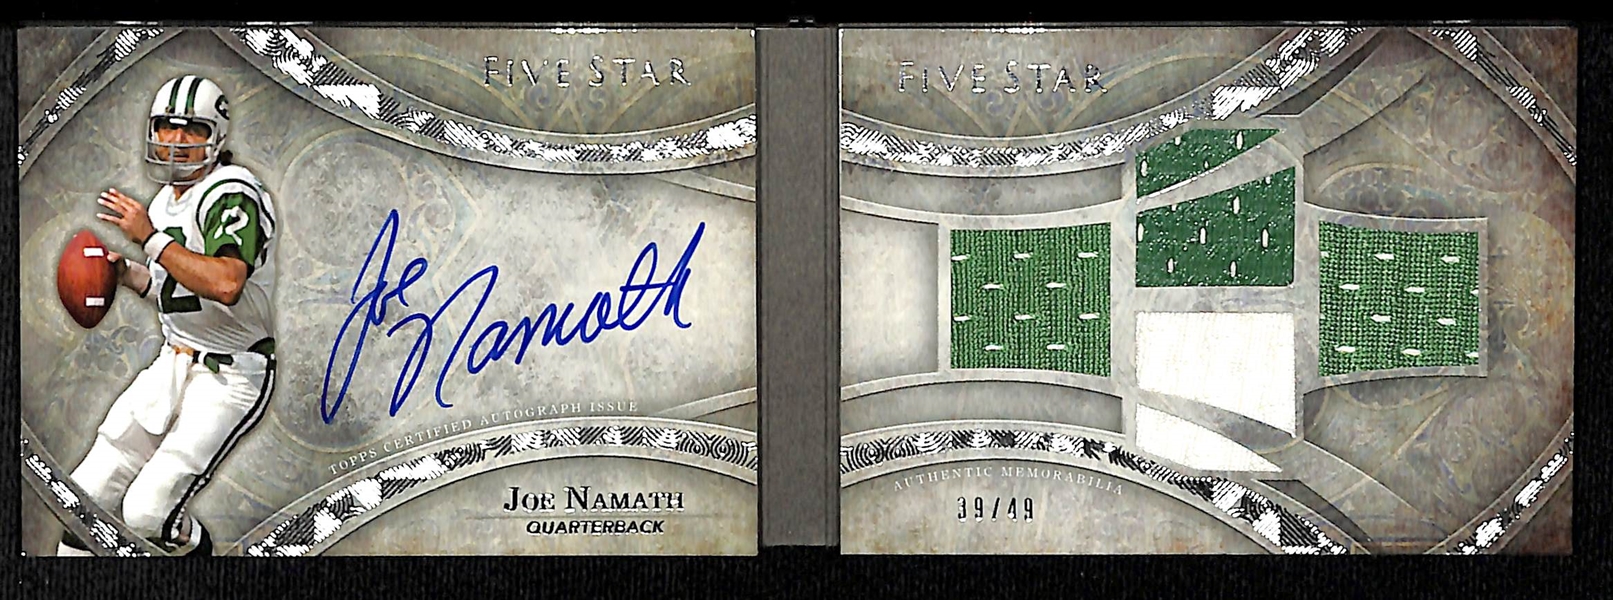 2014 Topps Five Star Joe Namath NY Jets Booklet Autograph 4-Piece Jersey Relic Card (#ed 39/49) w. On-Card Auto!